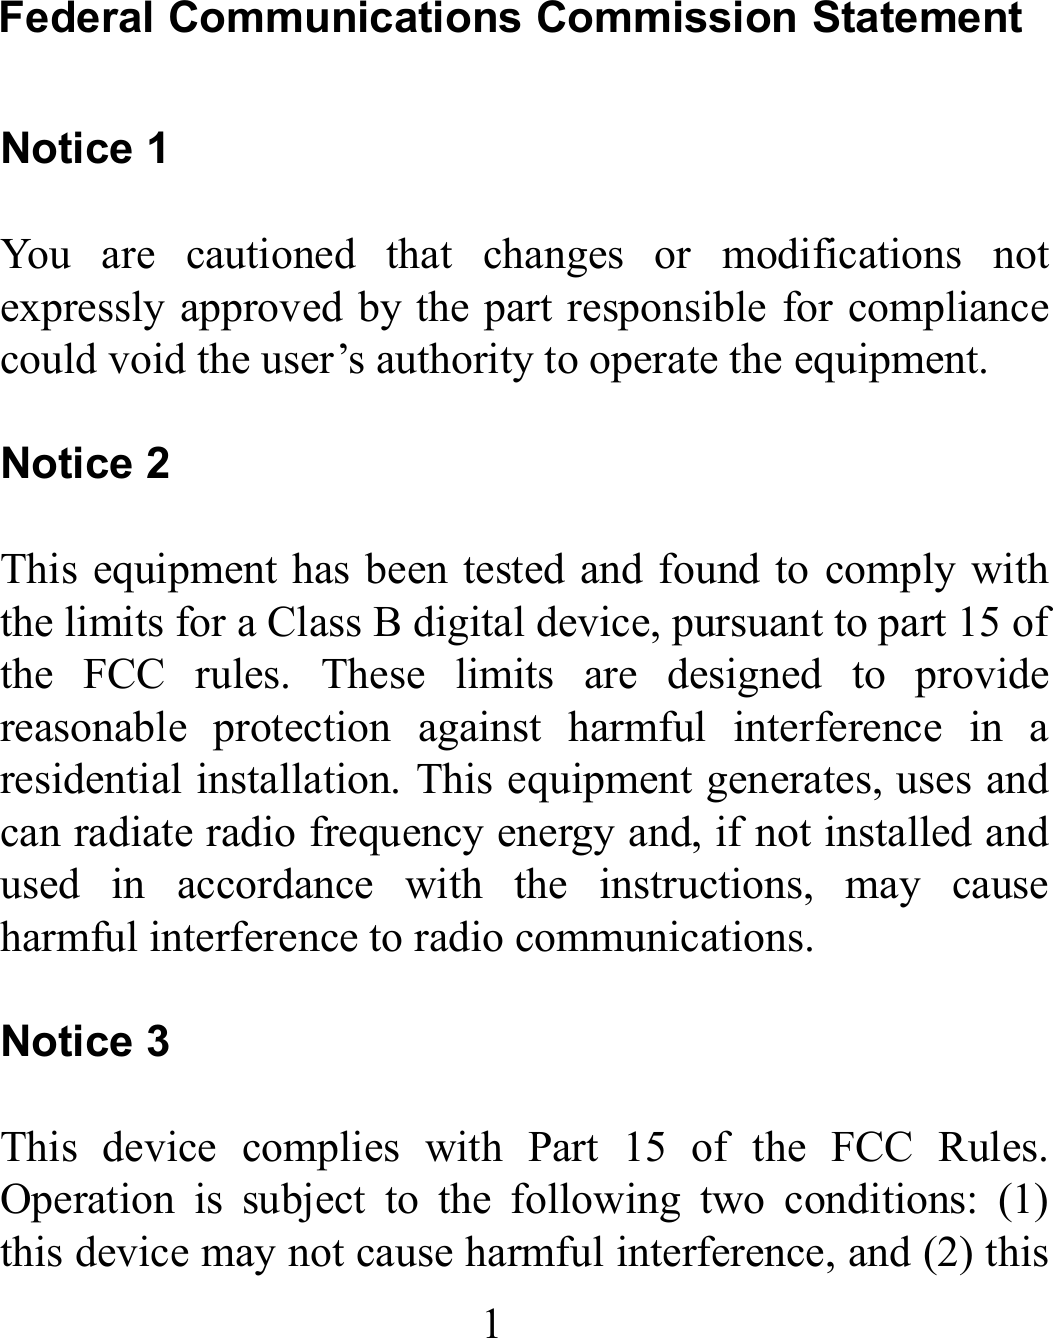 1 Federal Communications Commission Statement  Notice 1  You are cautioned that changes or modifications not expressly approved by the part responsible for compliance could void the user’s authority to operate the equipment.   Notice 2  This equipment has been tested and found to comply with the limits for a Class B digital device, pursuant to part 15 of the FCC rules. These limits are designed to provide reasonable protection against harmful interference in a residential installation. This equipment generates, uses and can radiate radio frequency energy and, if not installed and used in accordance with the instructions, may cause harmful interference to radio communications.  Notice 3  This device complies with Part 15 of the FCC Rules. Operation is subject to the following two conditions: (1) this device may not cause harmful interference, and (2) this 